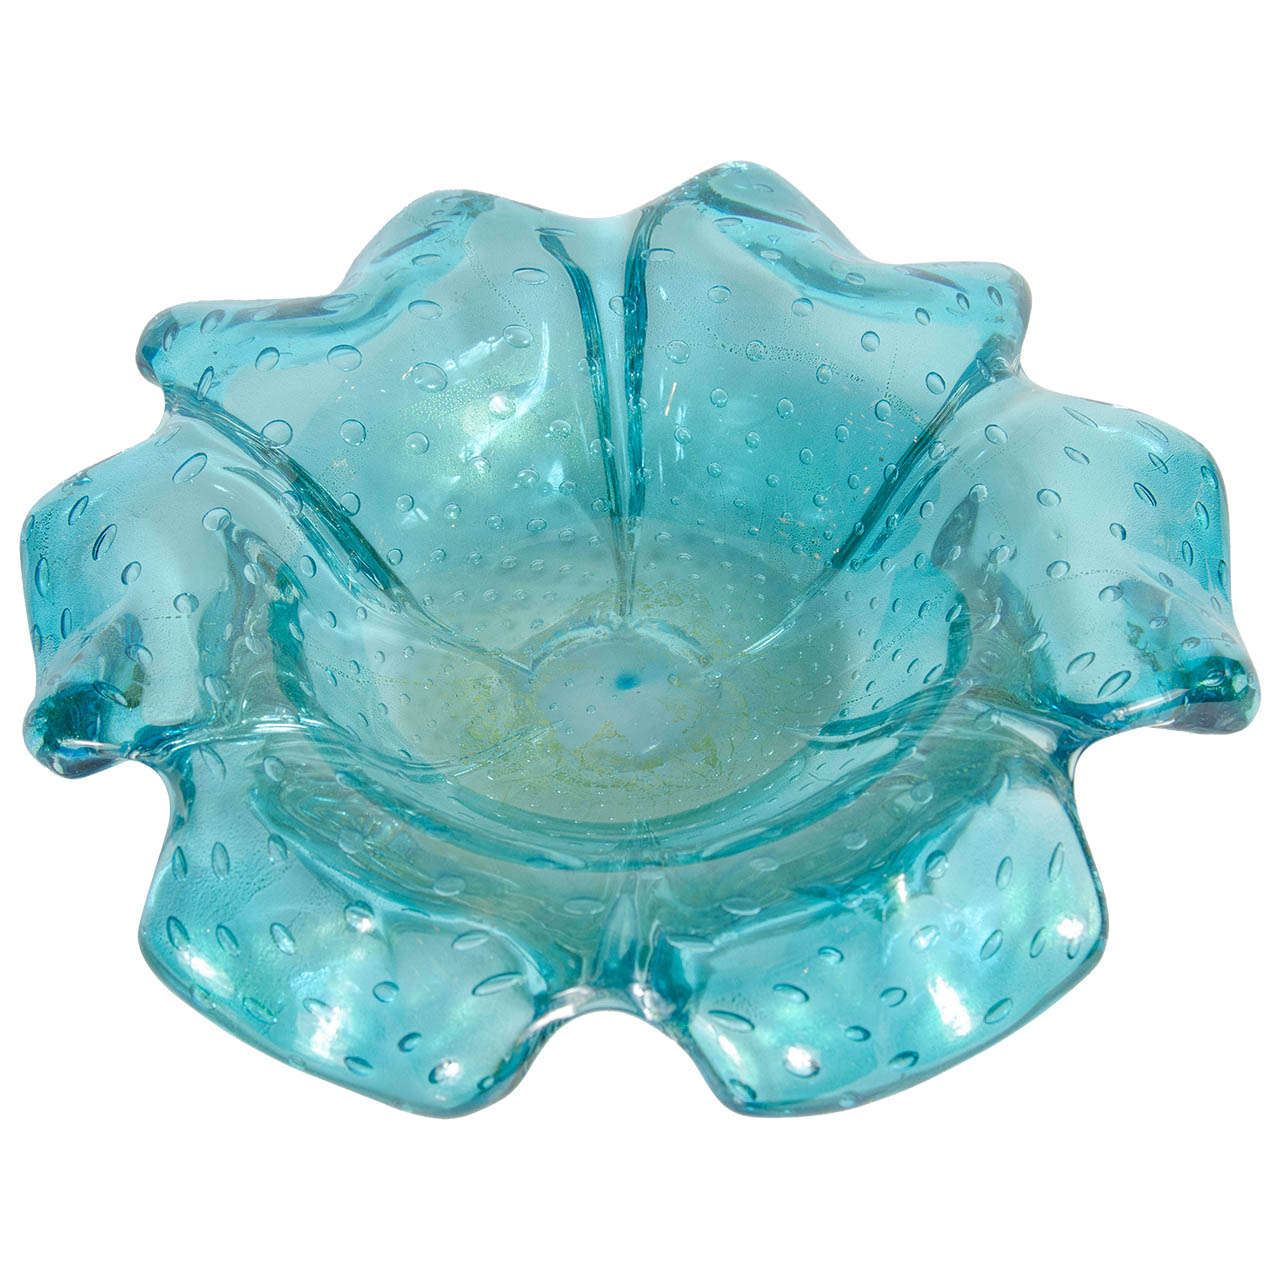 Stunnning Modernist Hand Blown Murano Glass Bowl by Barovier e Toso